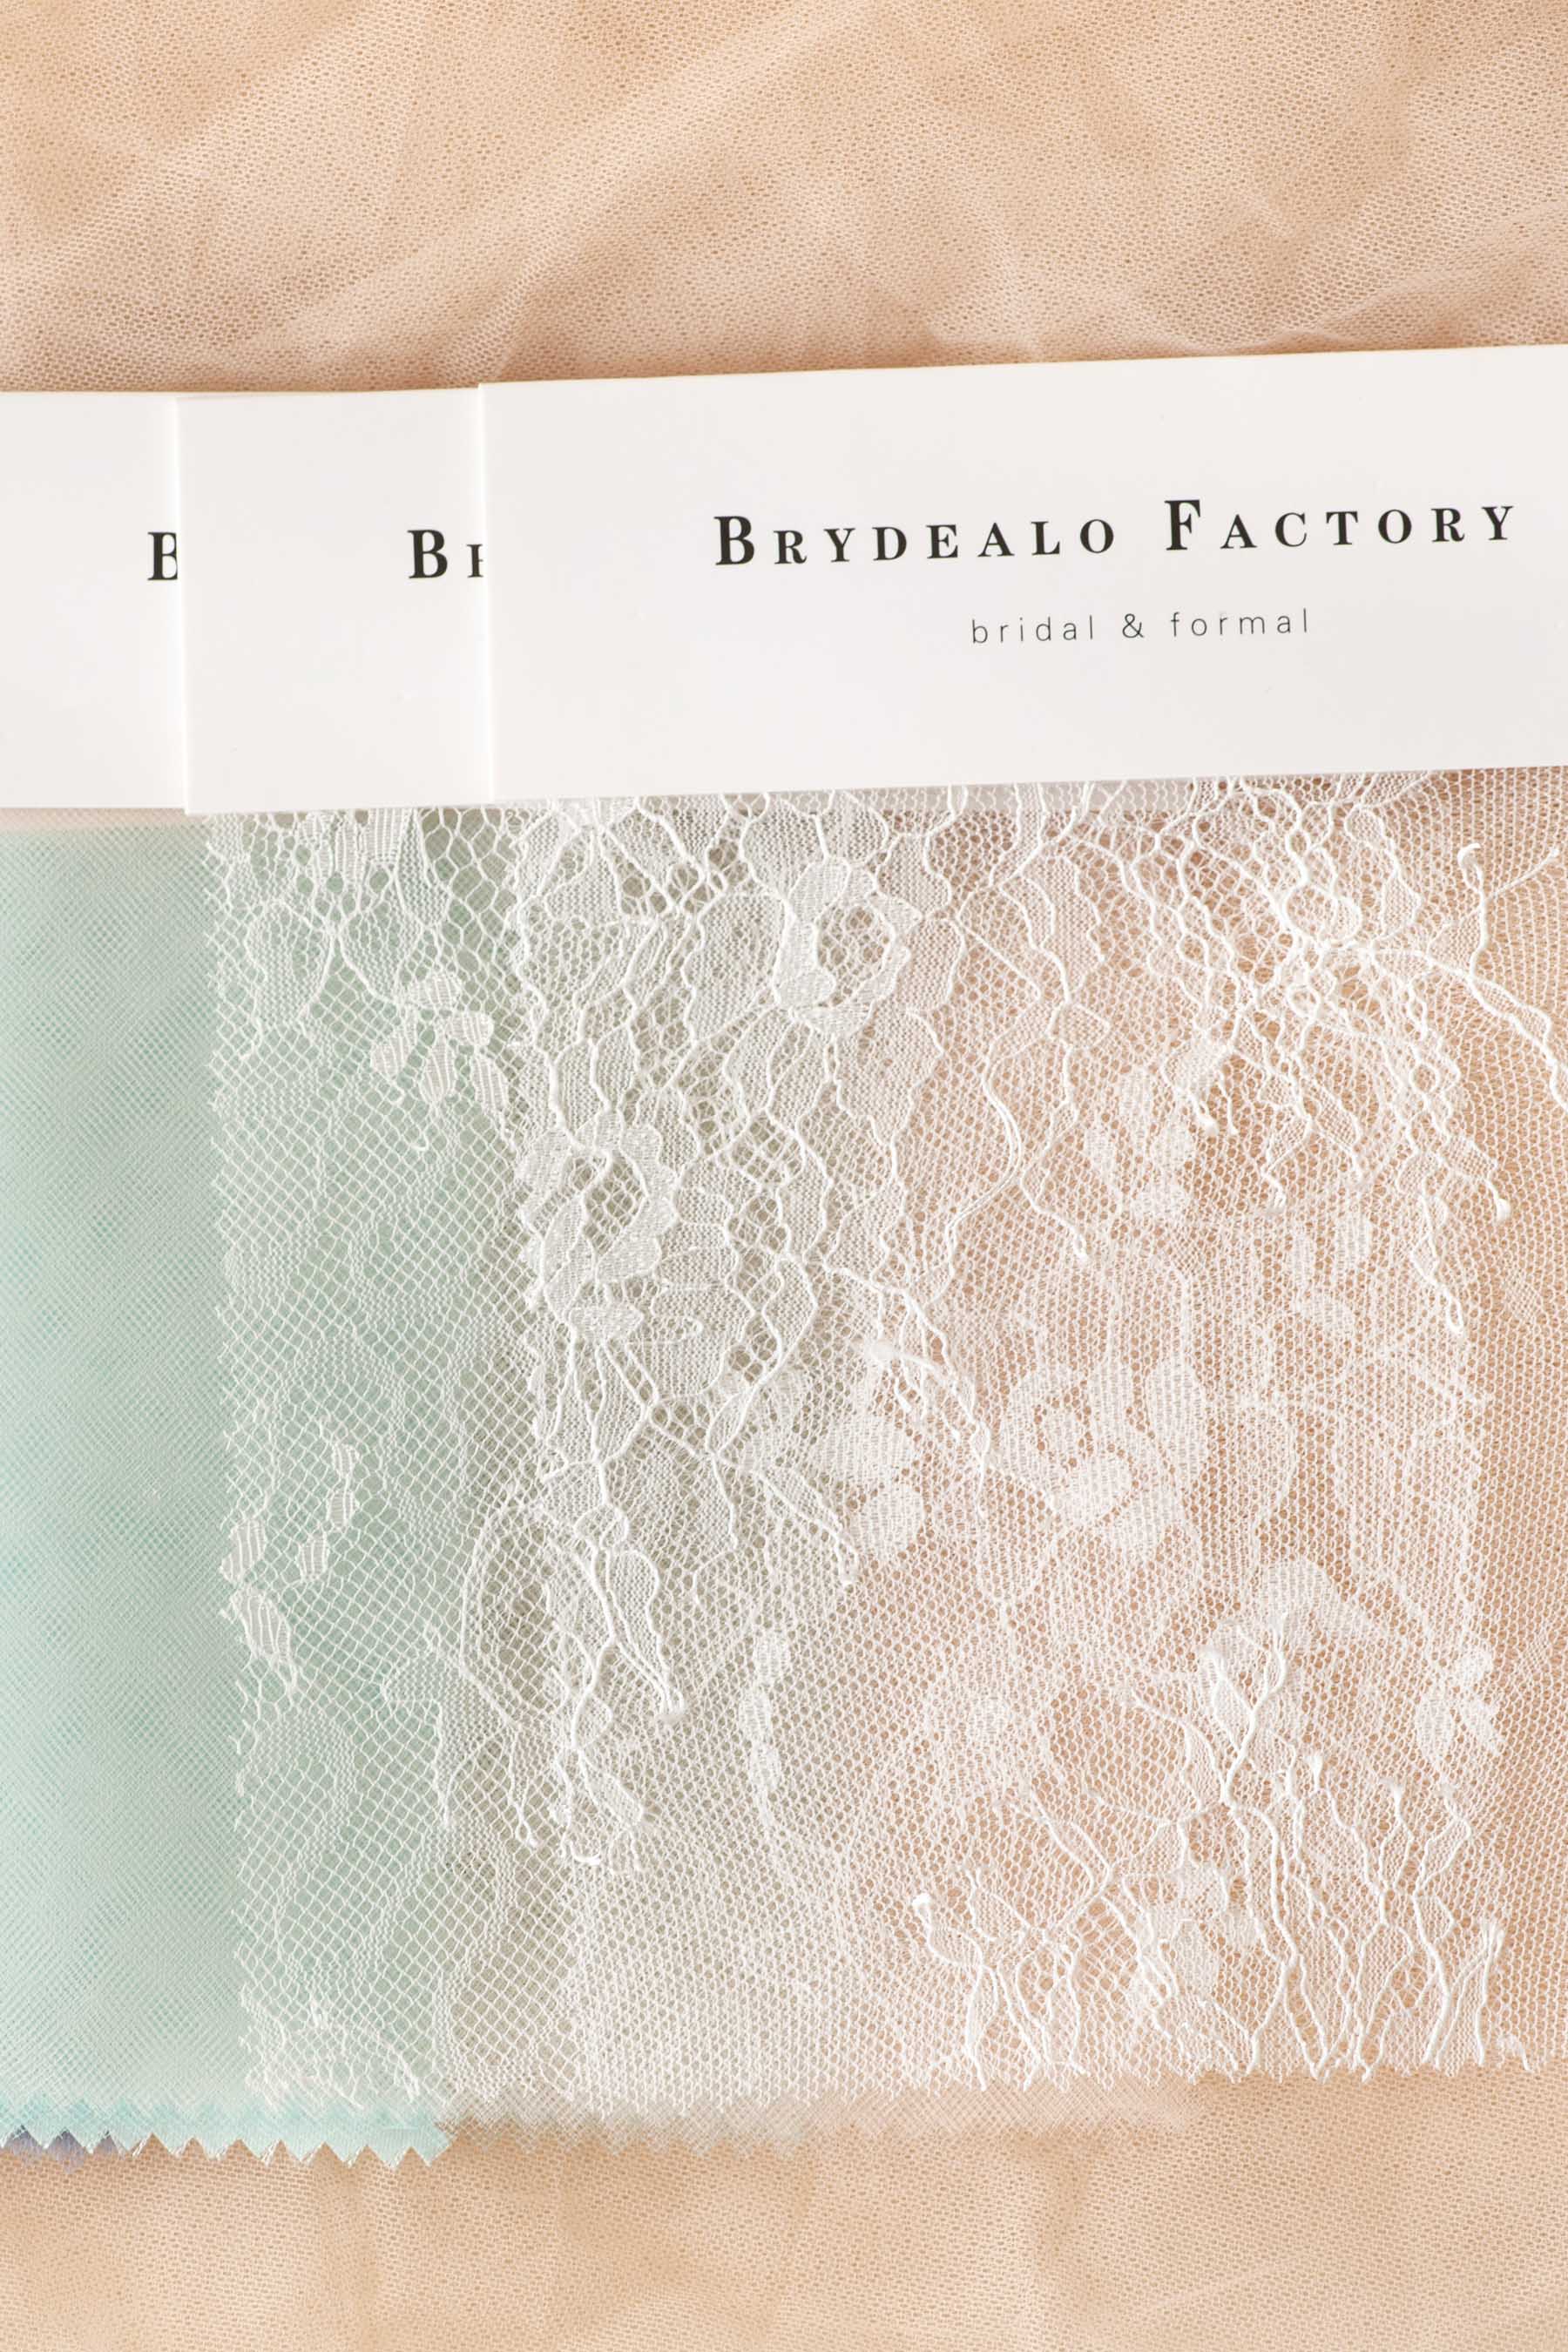 wholesale apparel fabrics samples swatches - Brydealo Factory